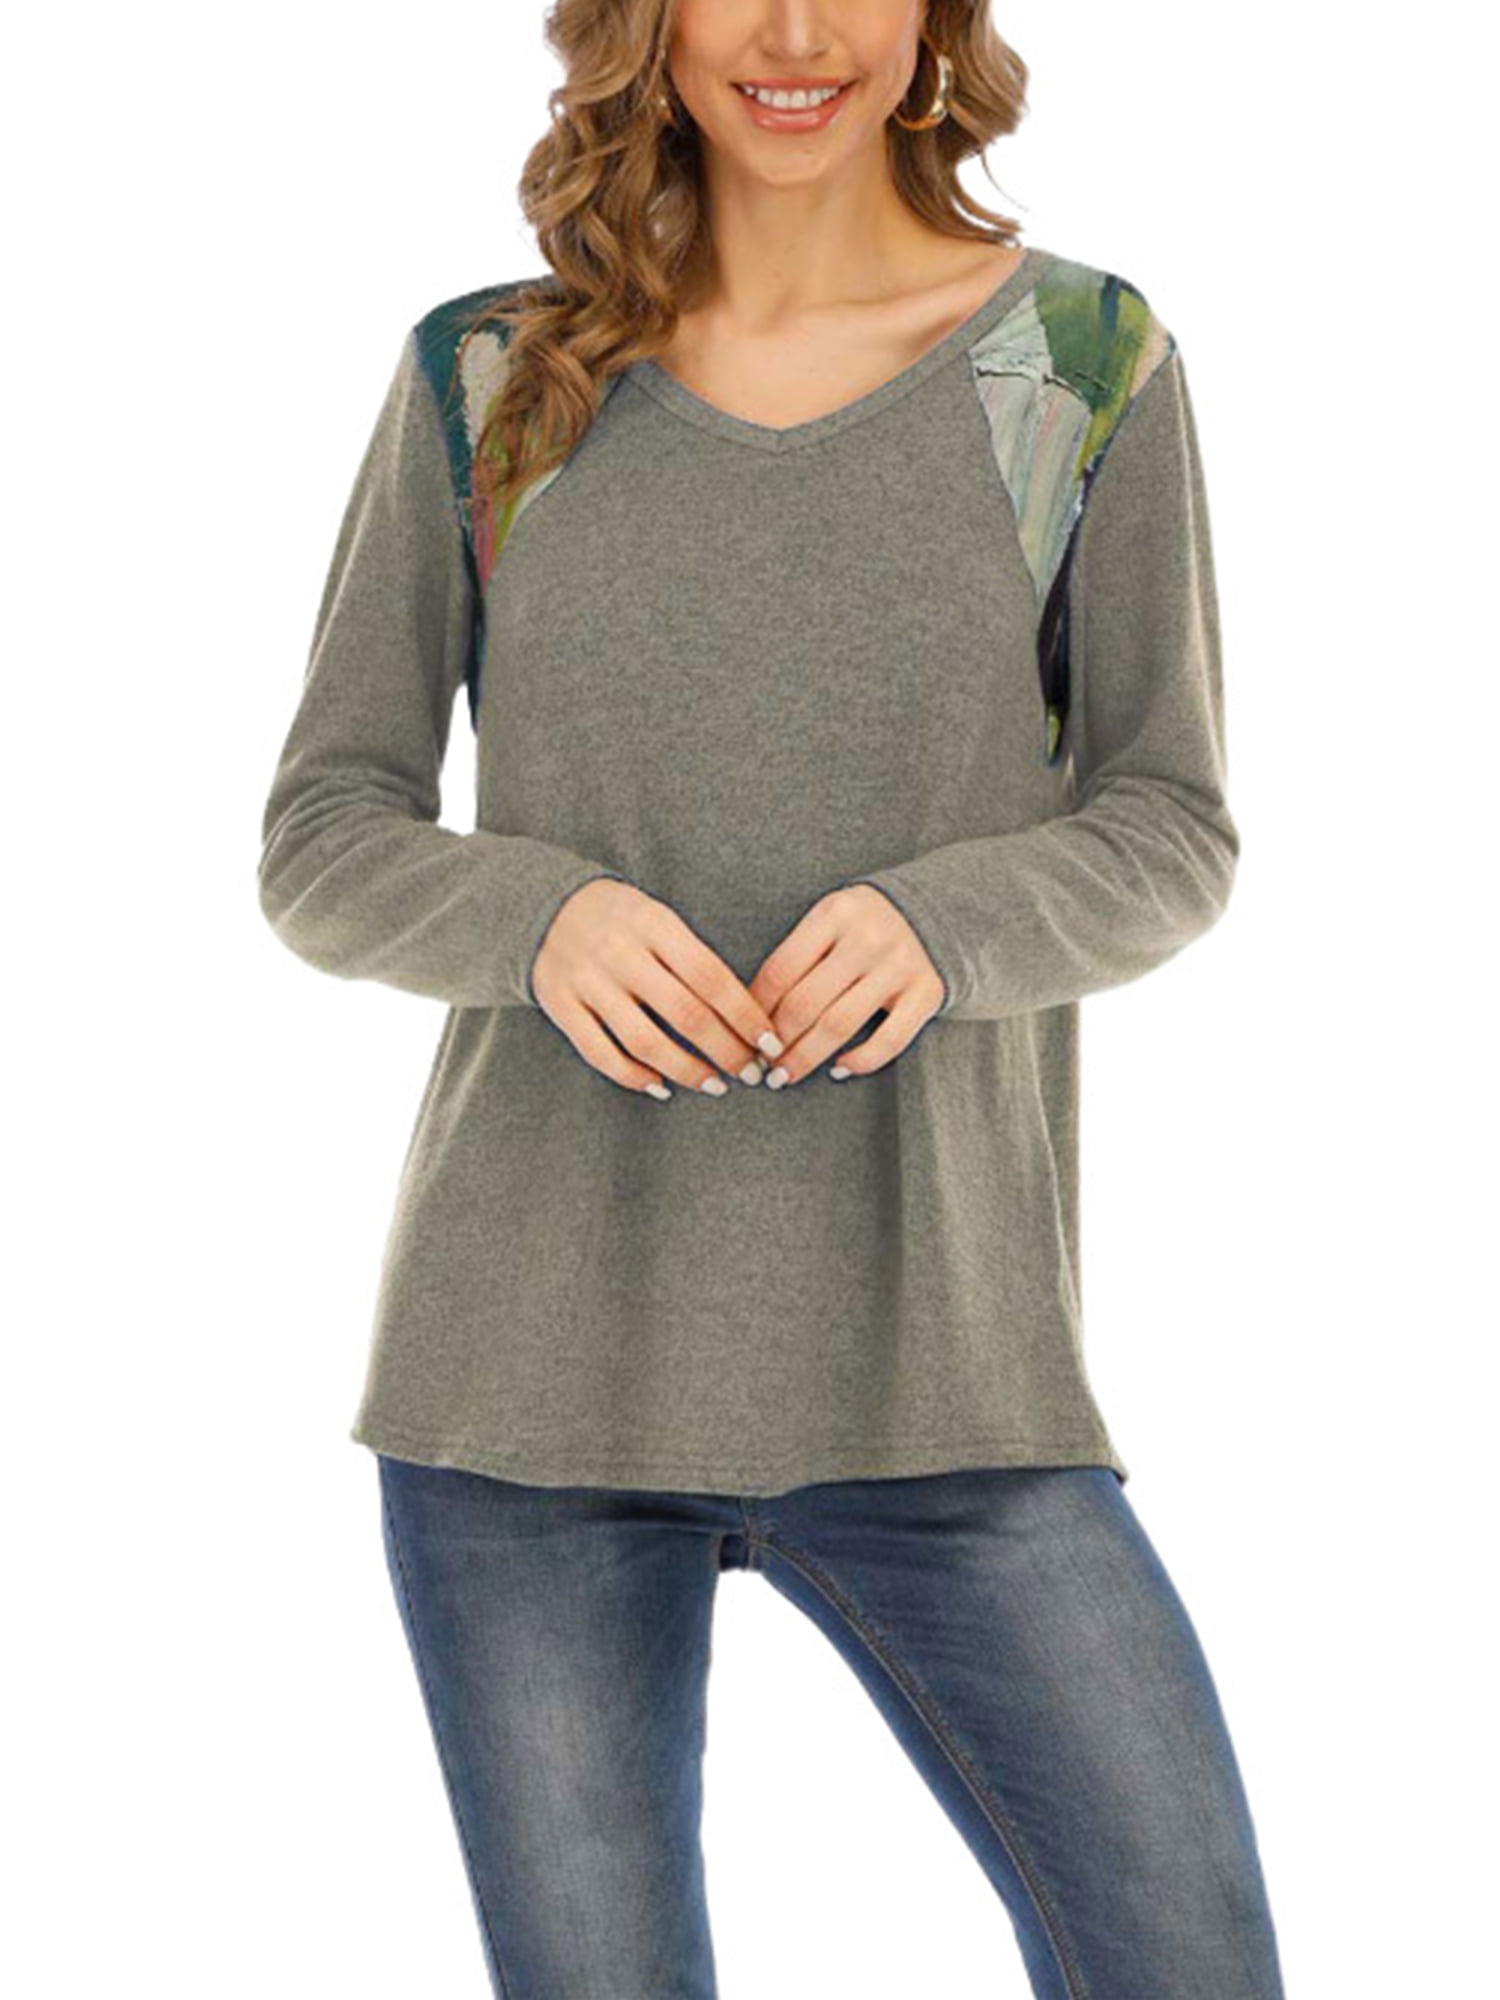 Mstyle Women Long Sleeve V Neck Stitching Loose Fit Casual T-Shirt Top Blouse